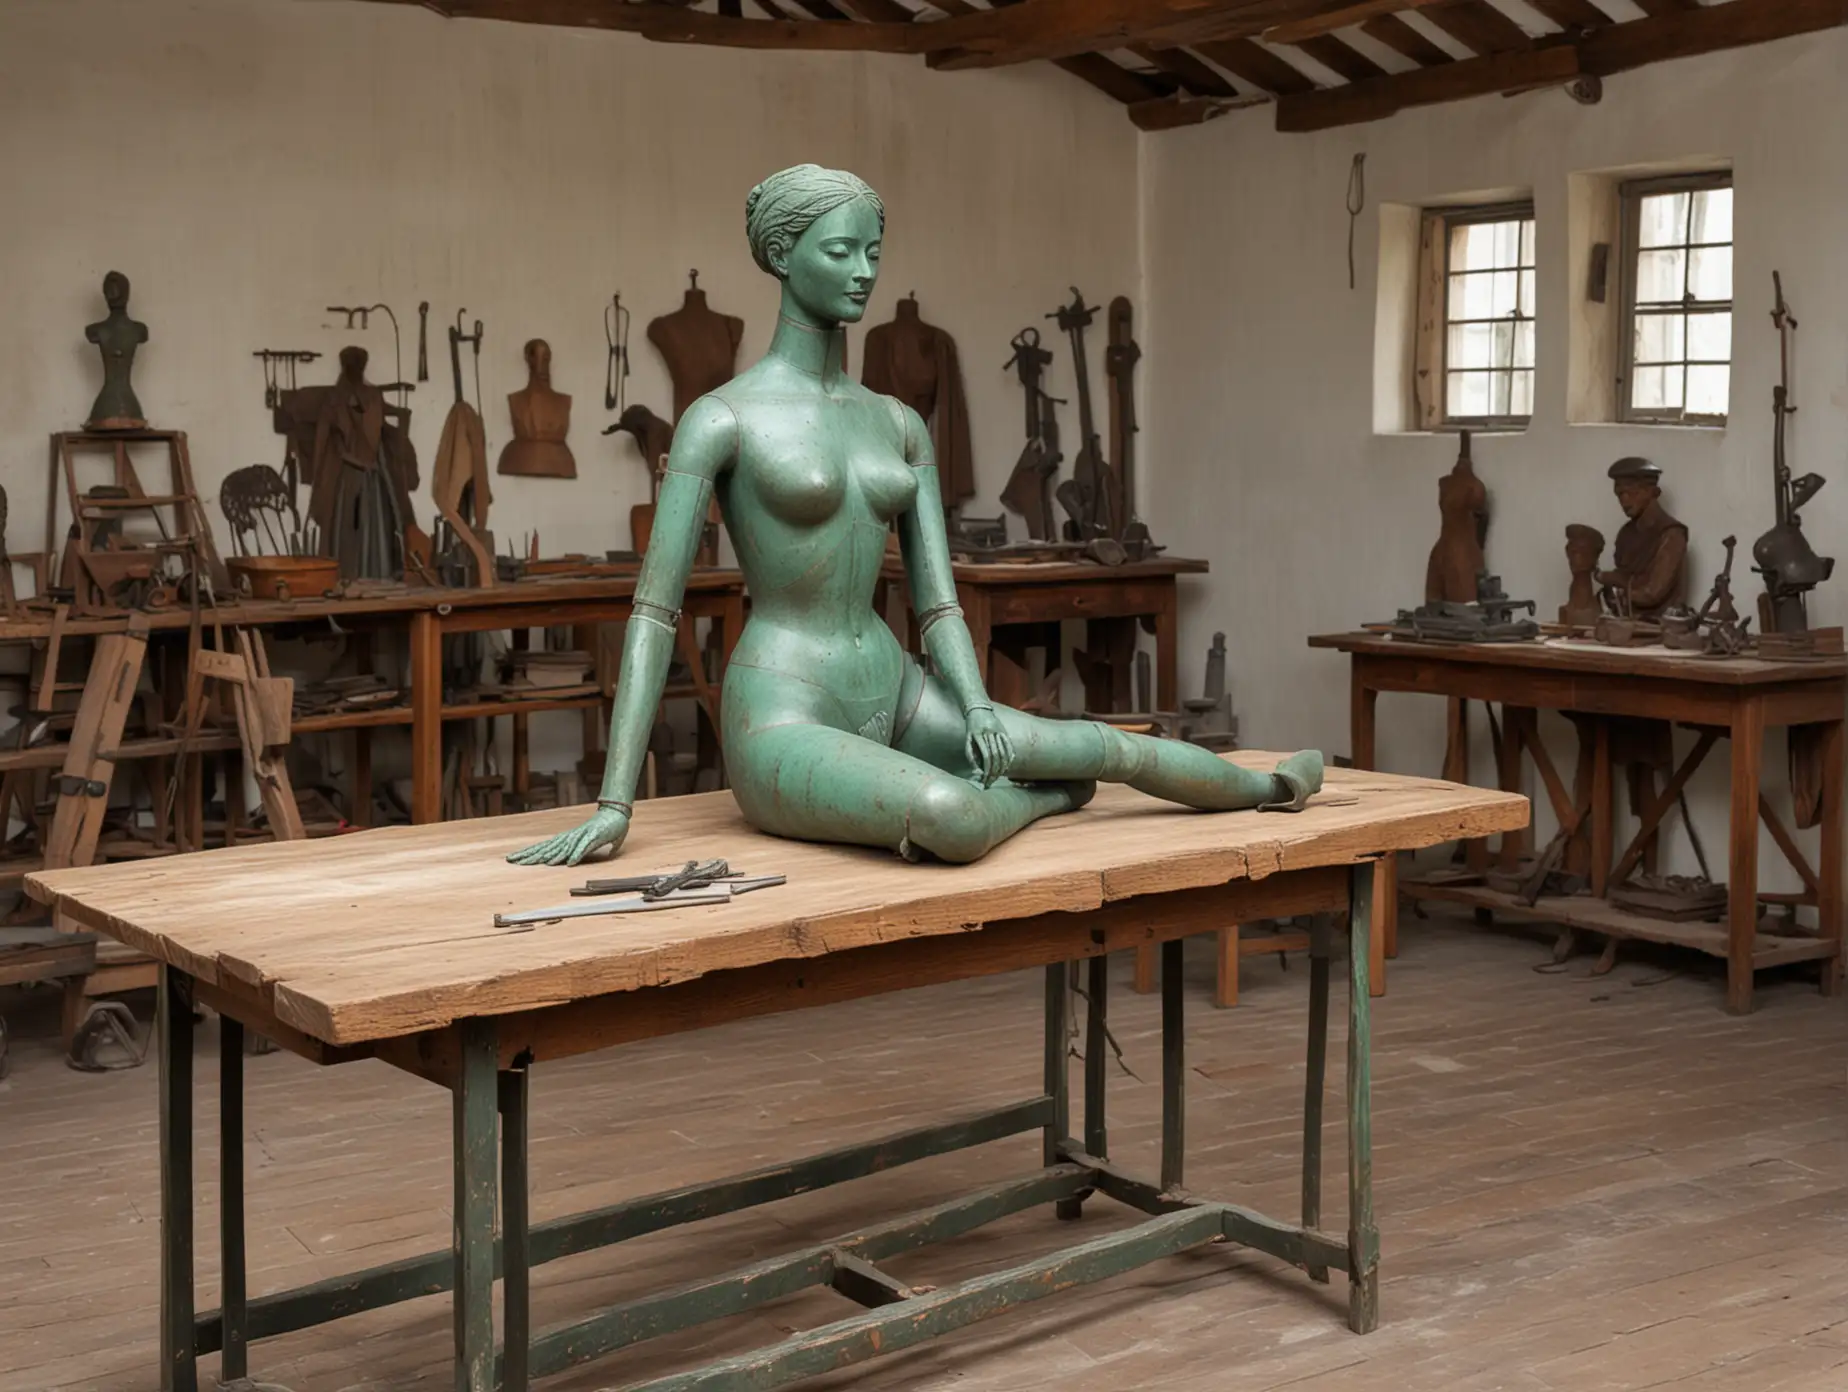 16th-Century-Workshop-Interior-Crafting-a-Green-Patina-Metal-Mannequin